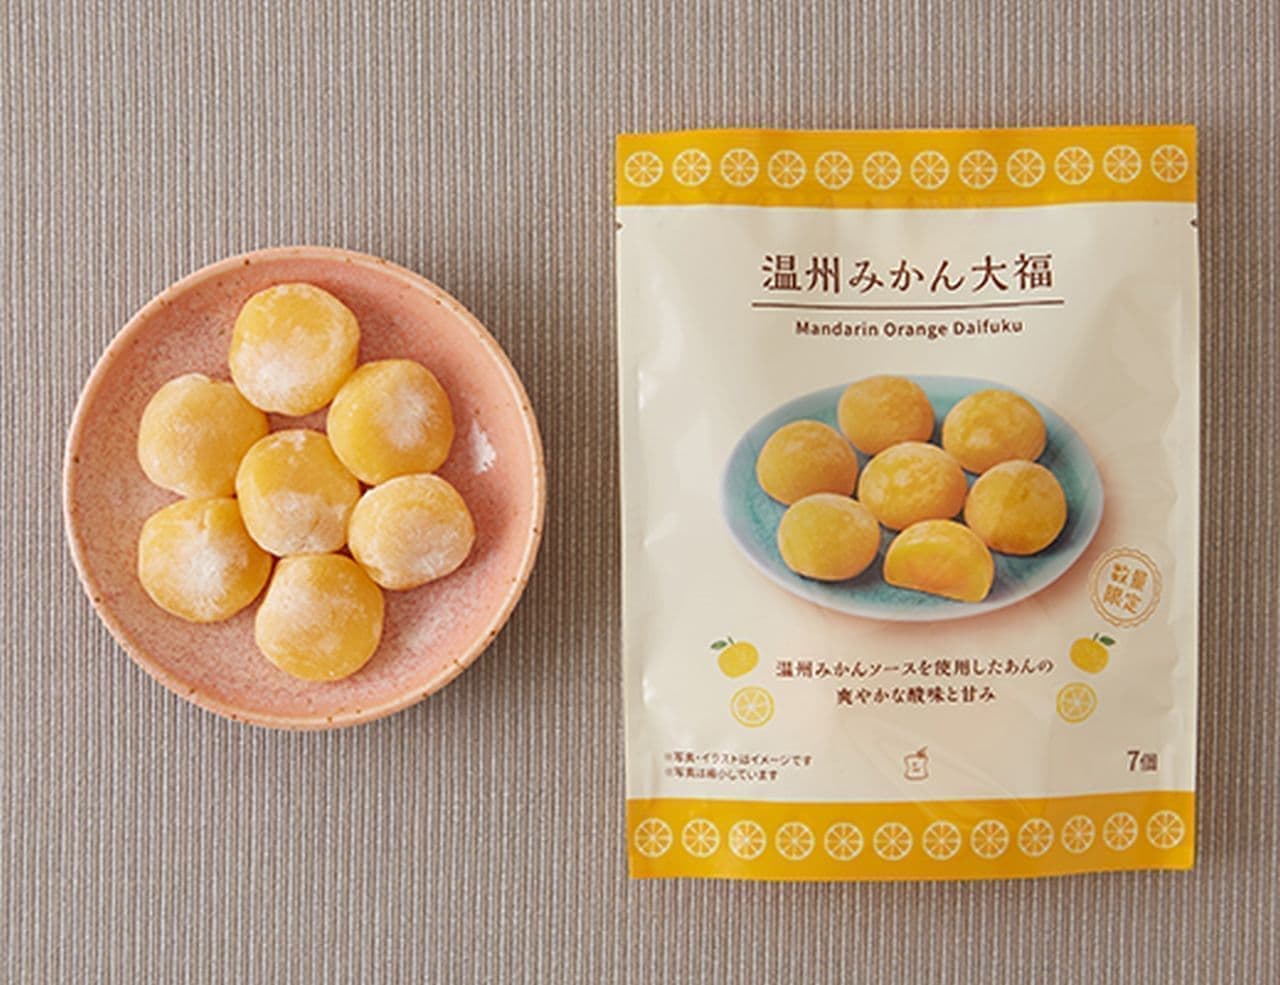 Newly released on December 13th: LAWSON's new sweets.